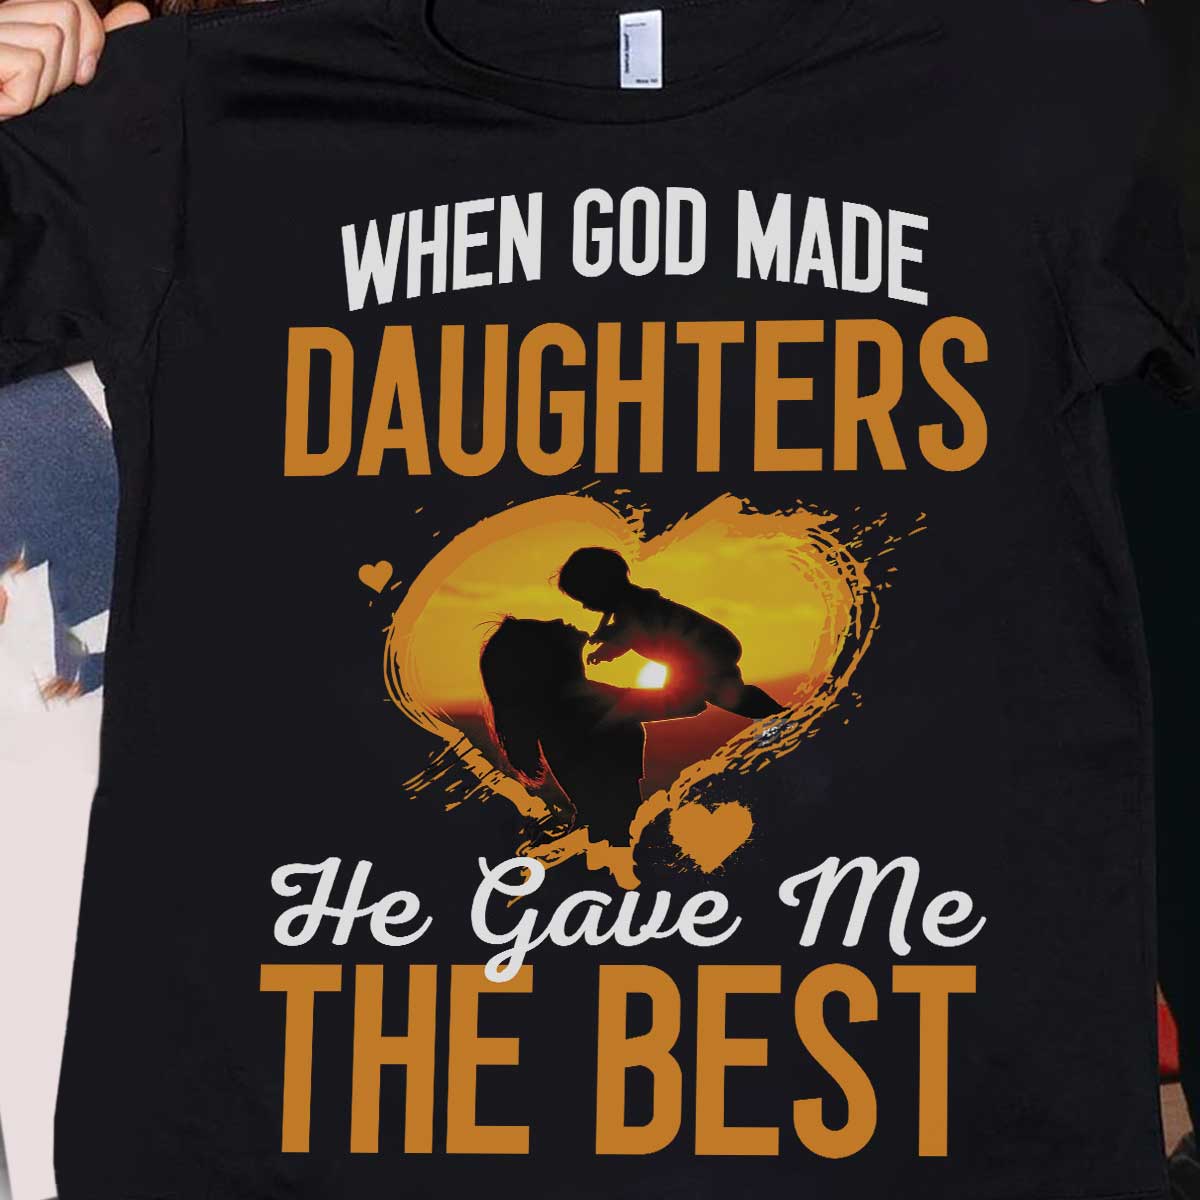 When god made daughters he gave me the best - Mother and daughter